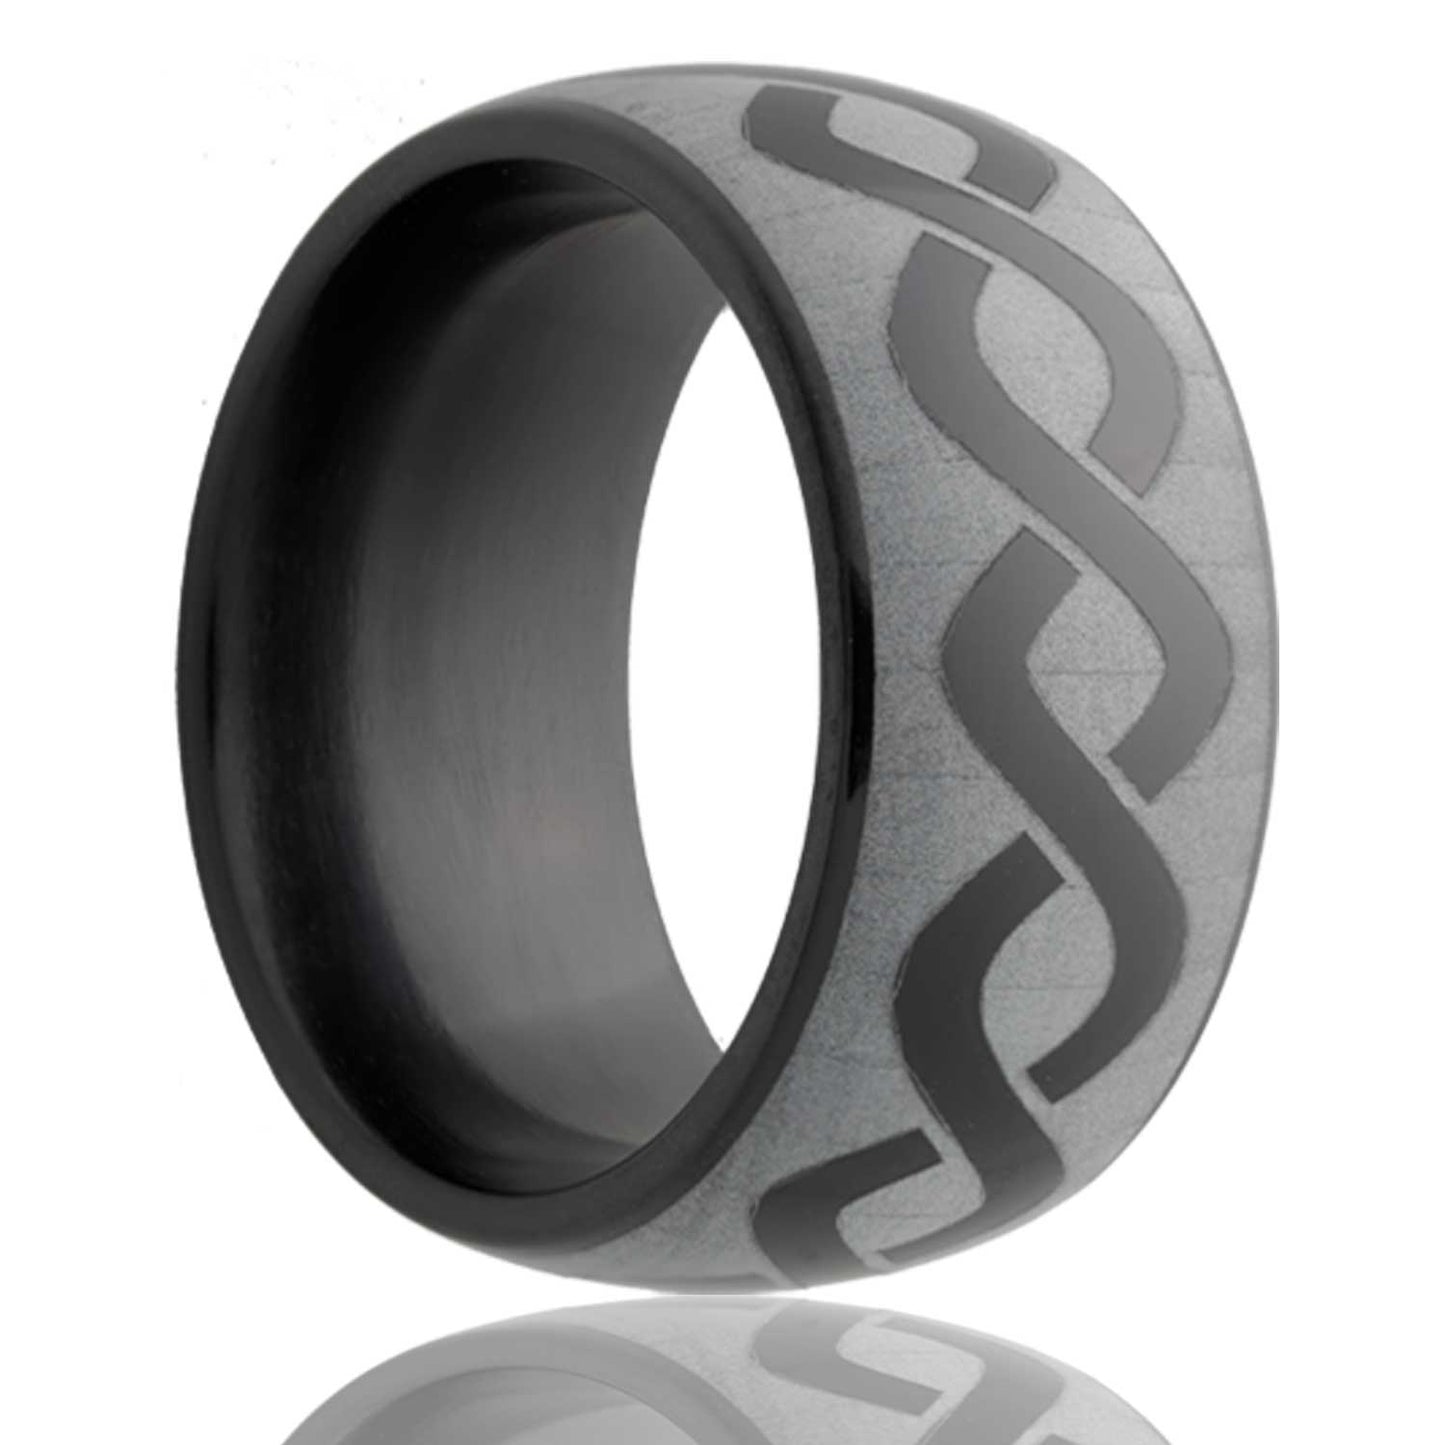 A infinity waves infinity waves domed black ceramic wedding band displayed on a neutral white background.